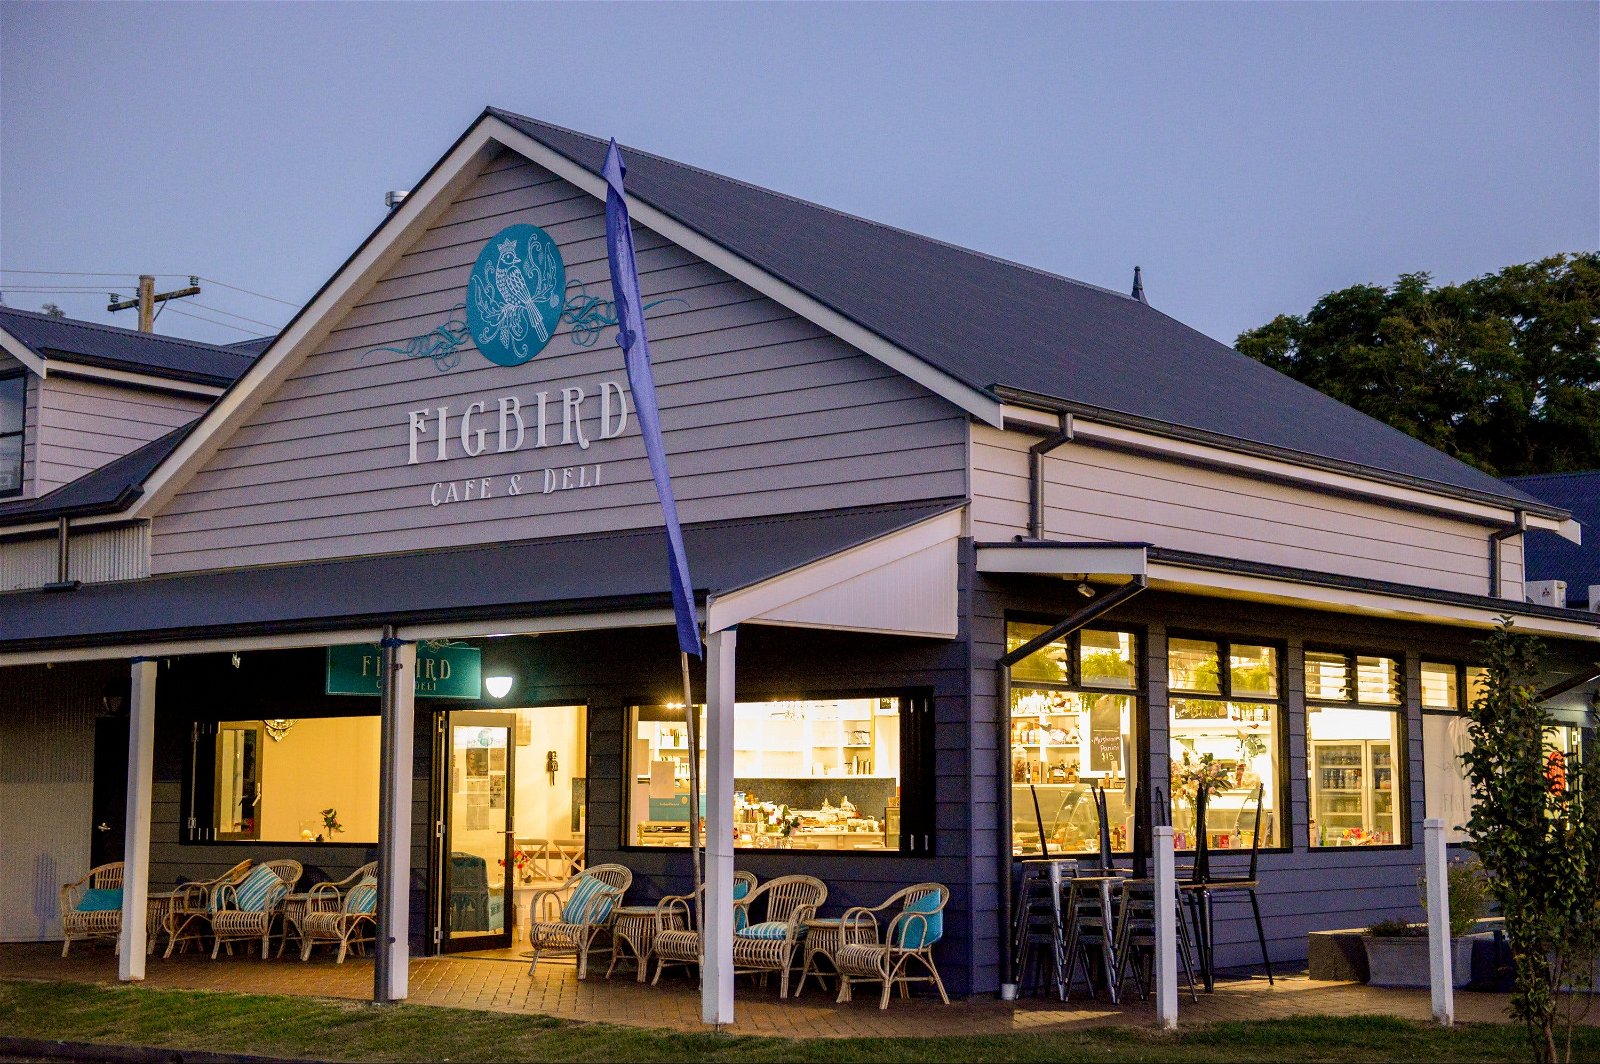 Figbird Cafe and Deli - Great Ocean Road Tourism